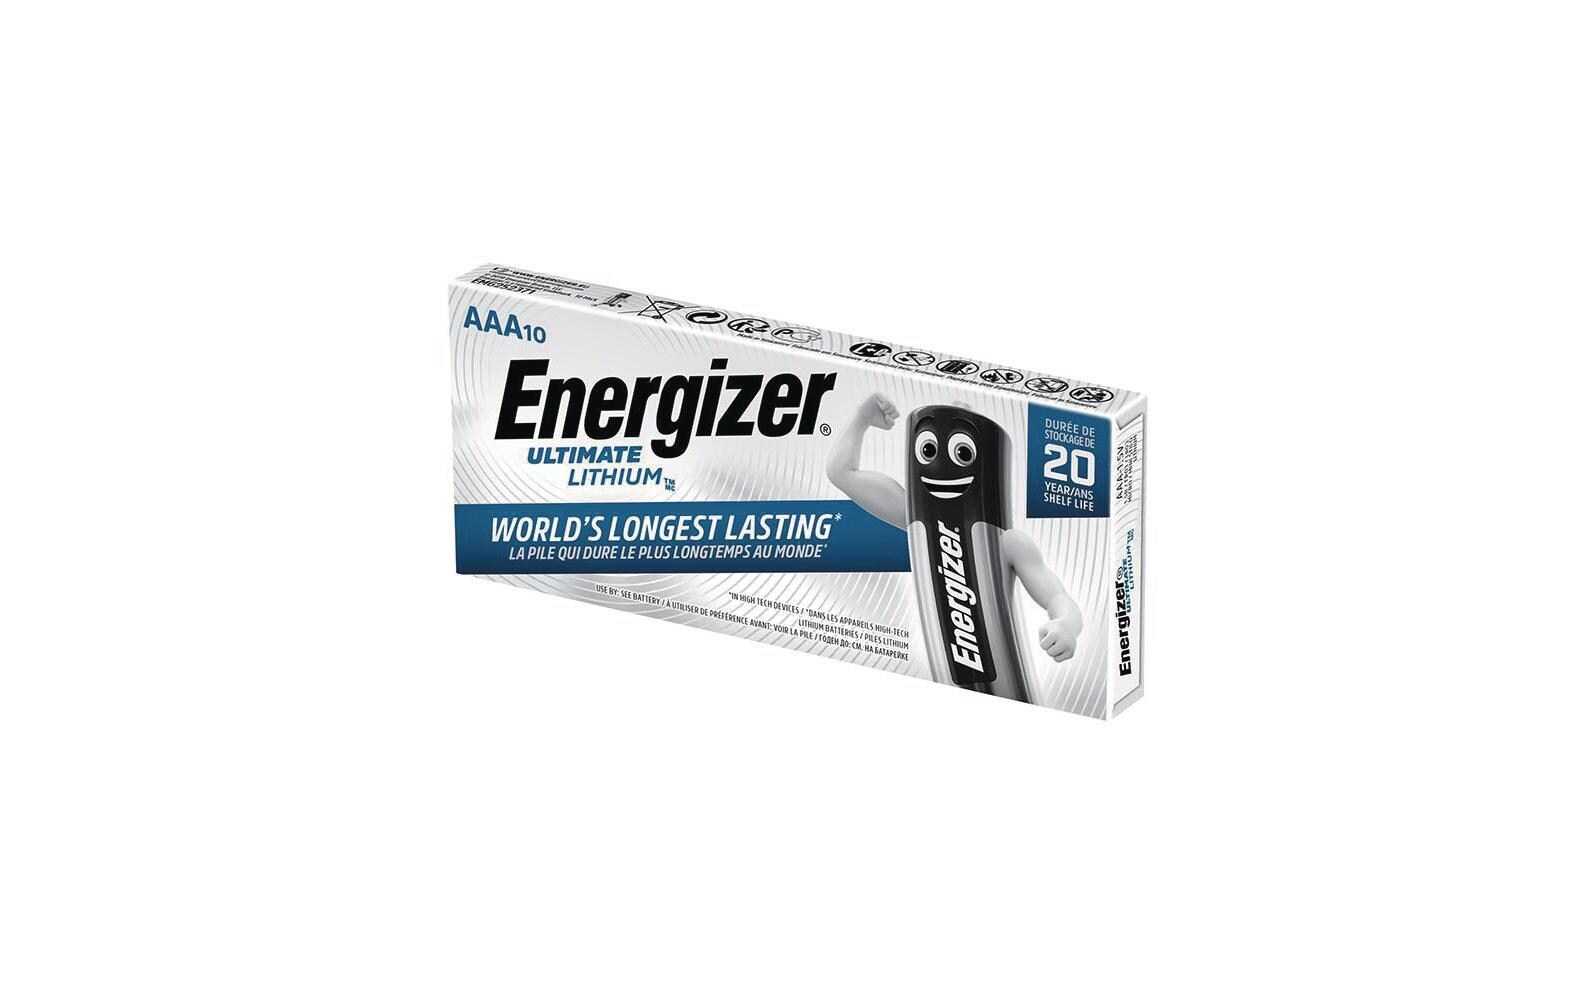 Energizer Batterie »Ultimate Lithium«